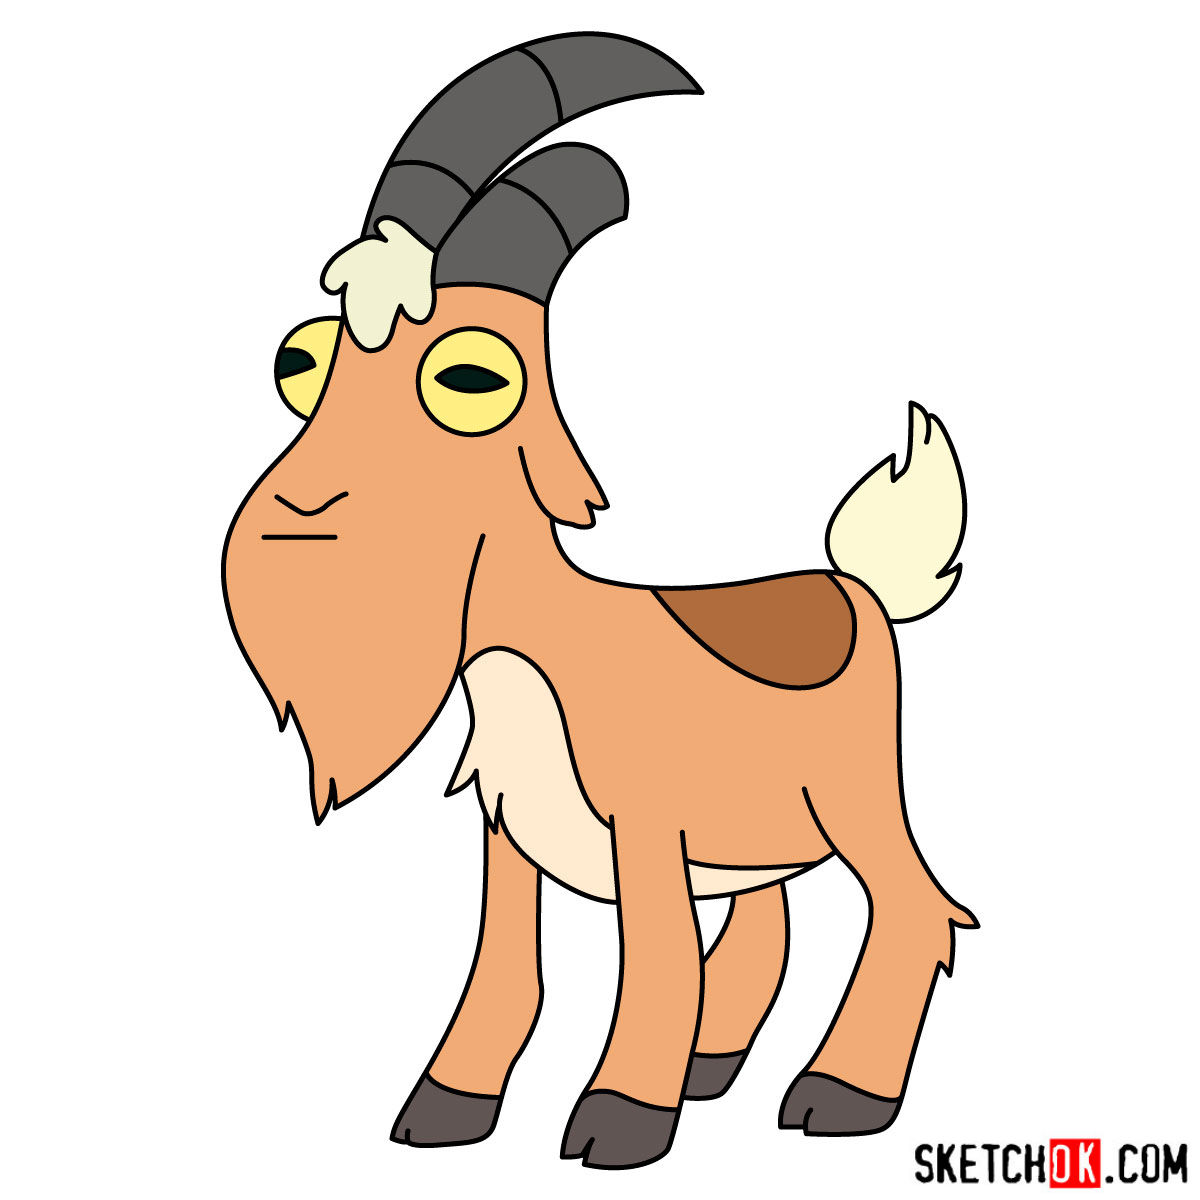 Amazing How To Draw A Goat Cartoon in the year 2023 Learn more here 